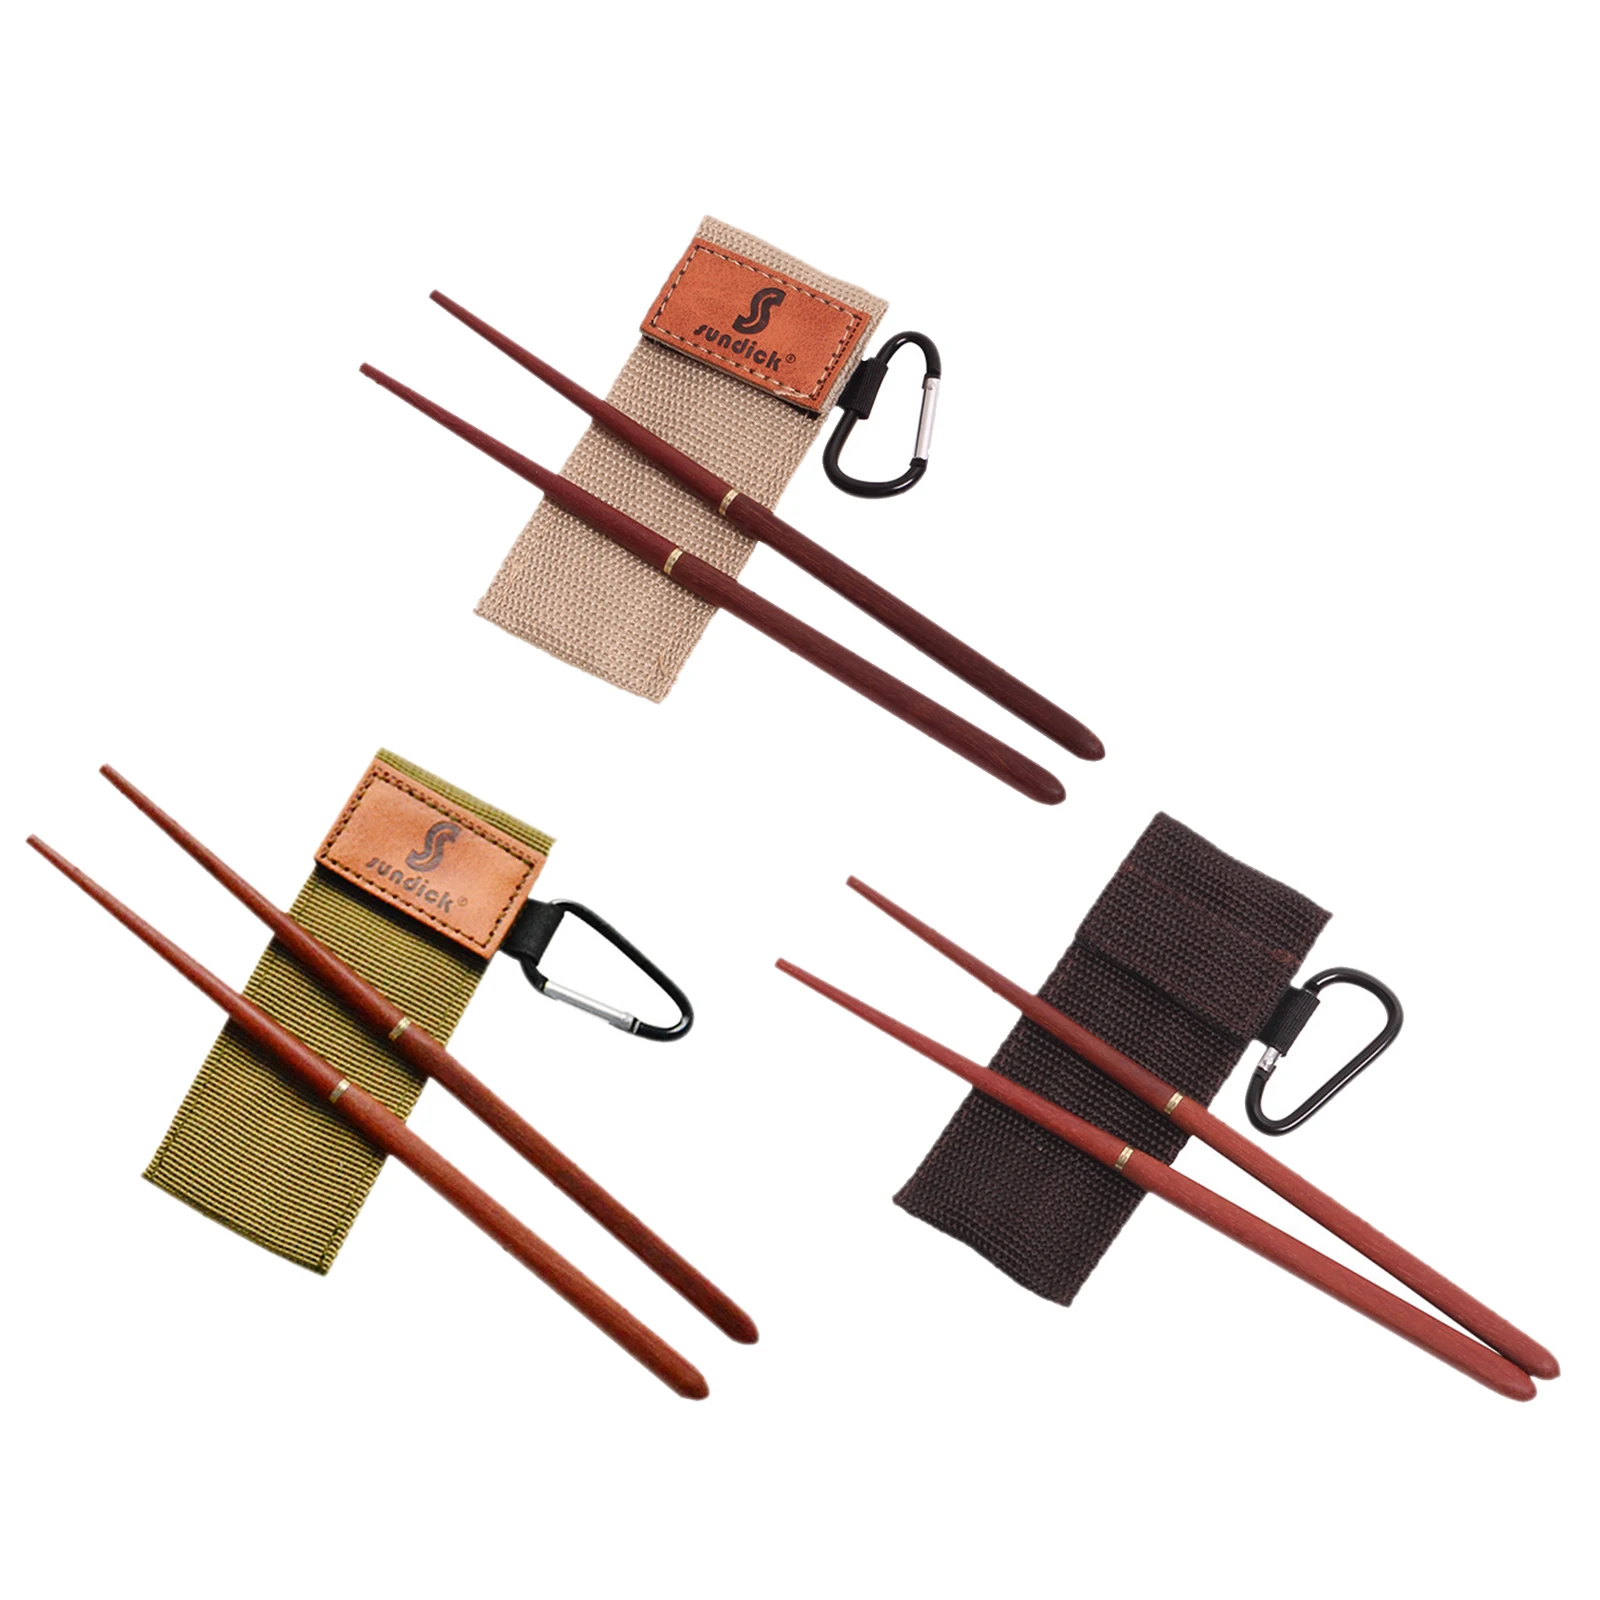 1 Pair Collapsible Wooden Chopsticks Portable Tableware - for Picnic Camping Office Travel